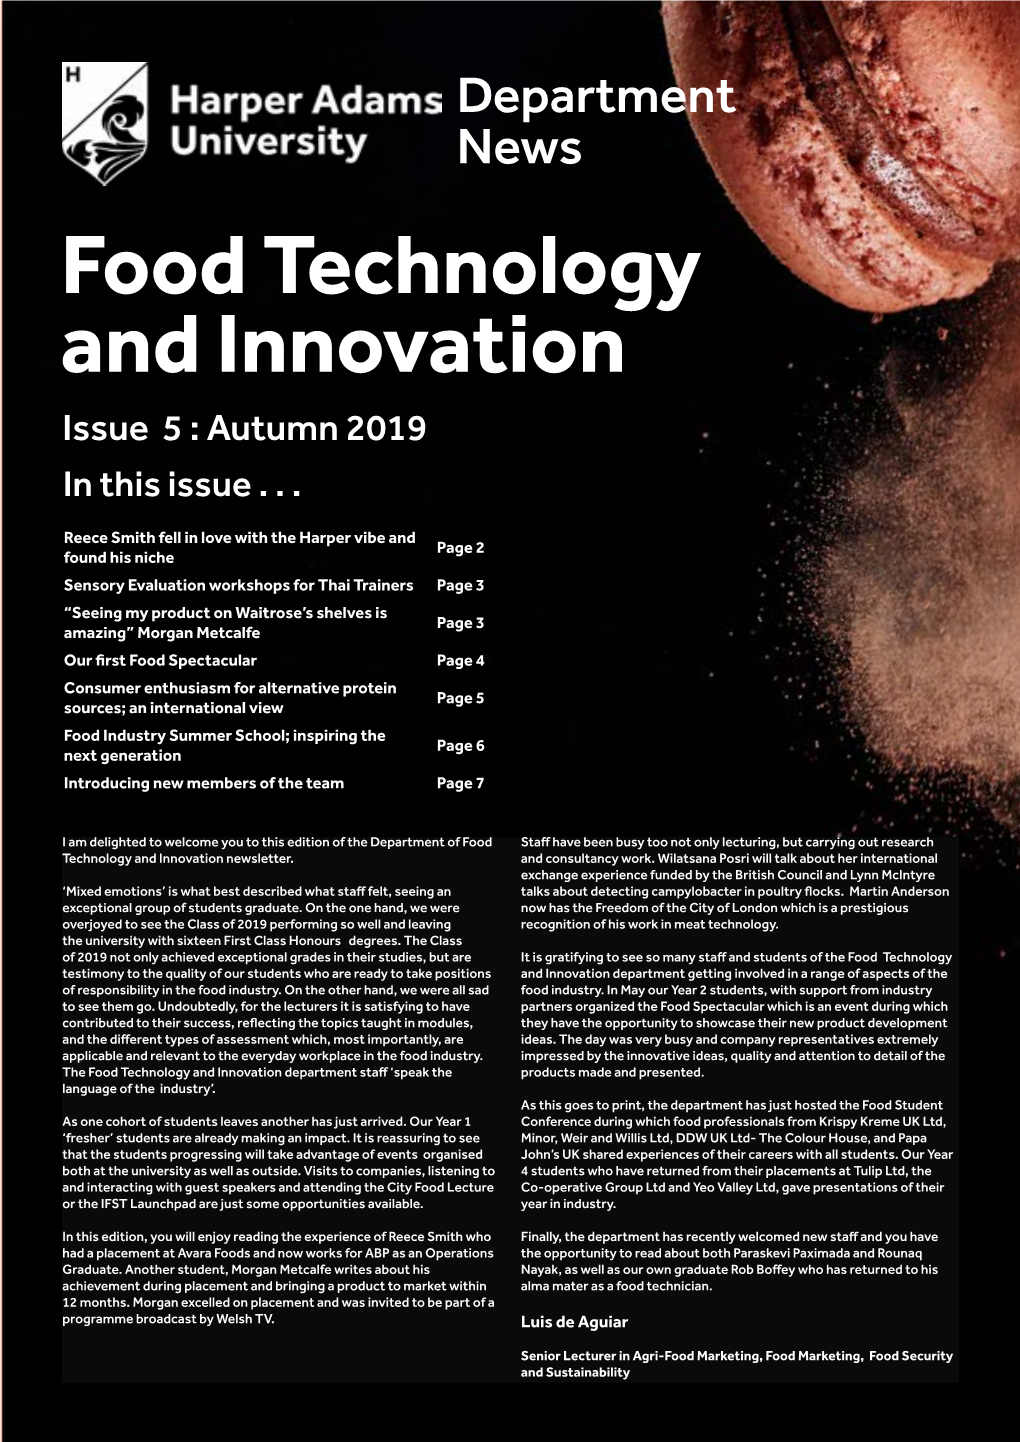 Food Technology and Innovation Newsletter